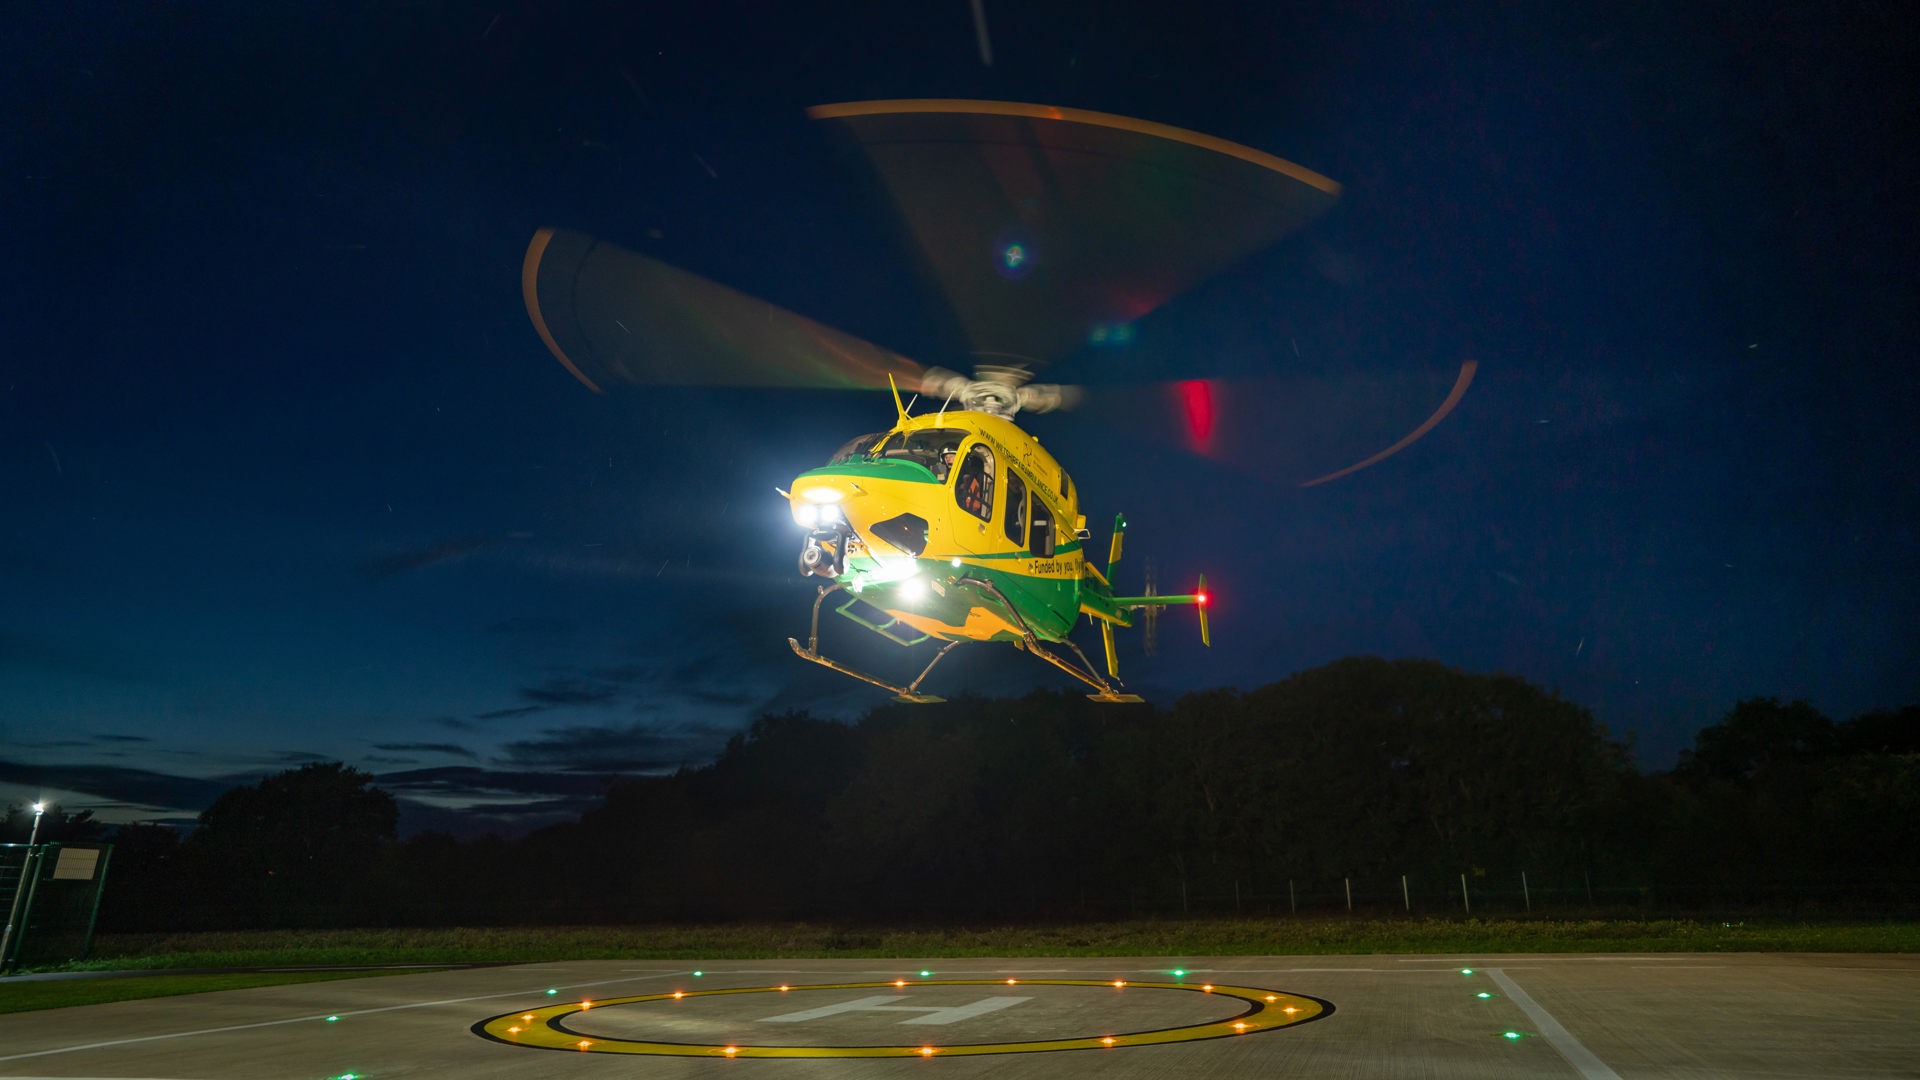 Wiltshire Air Ambulance's helicopter taking off at night